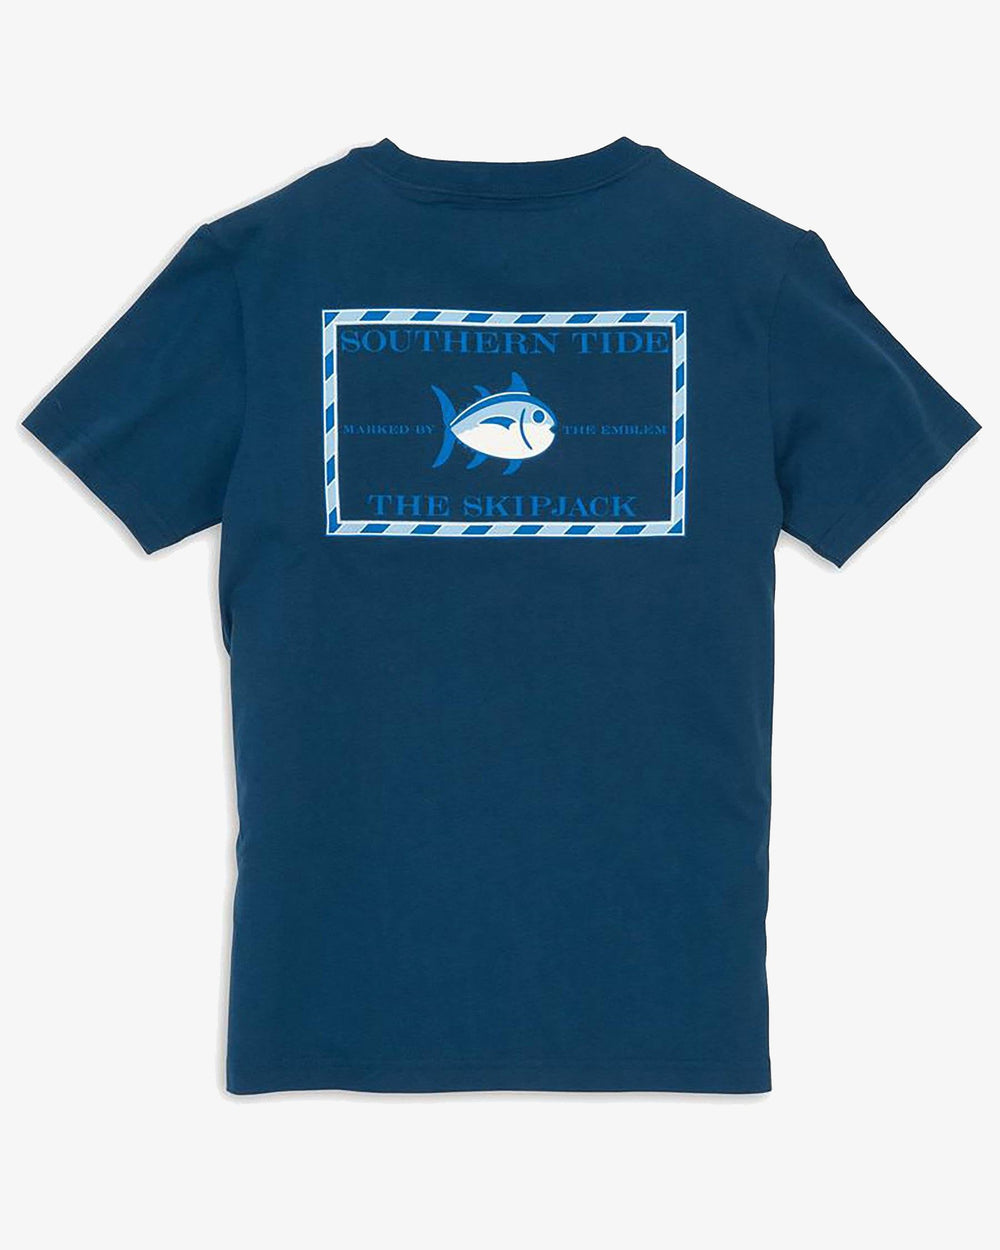 The back view of the Kid's Navy Original Skipjack T-Shirt by Southern Tide - Yacht Blue